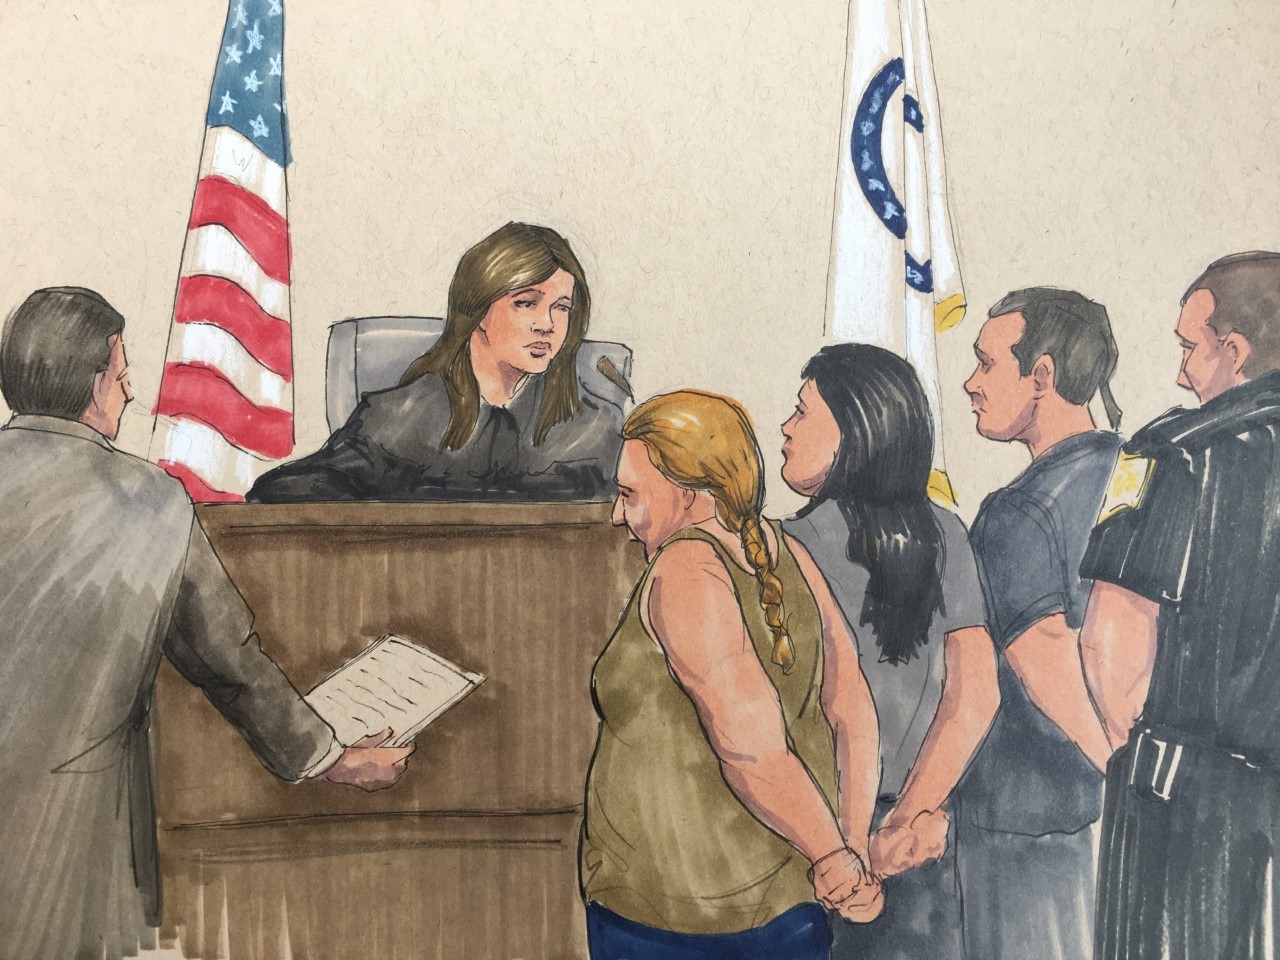 Clarisa Figueroa, center front, appears in court Friday, May 17, 2019 with daughter Desiree Figueroa, right, and Piotr Bobak before Cook County Judge Susana Ortiz. (Sketch by Thomas Gianni)